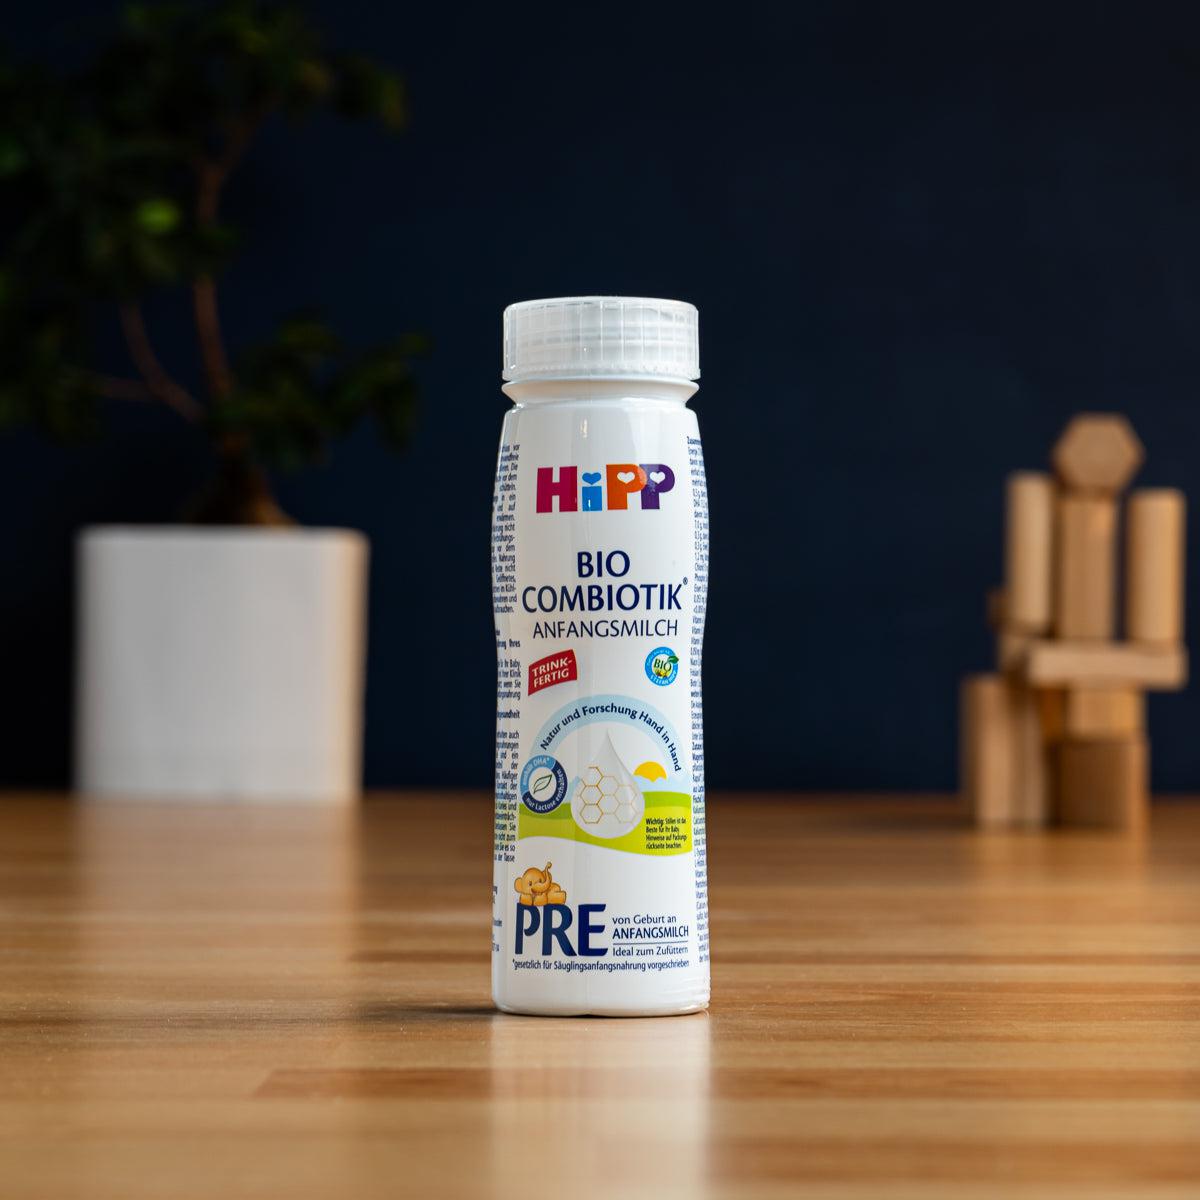 HiPP Stage PRE Ready to Feed Formula (200ml) - 60 Bottles